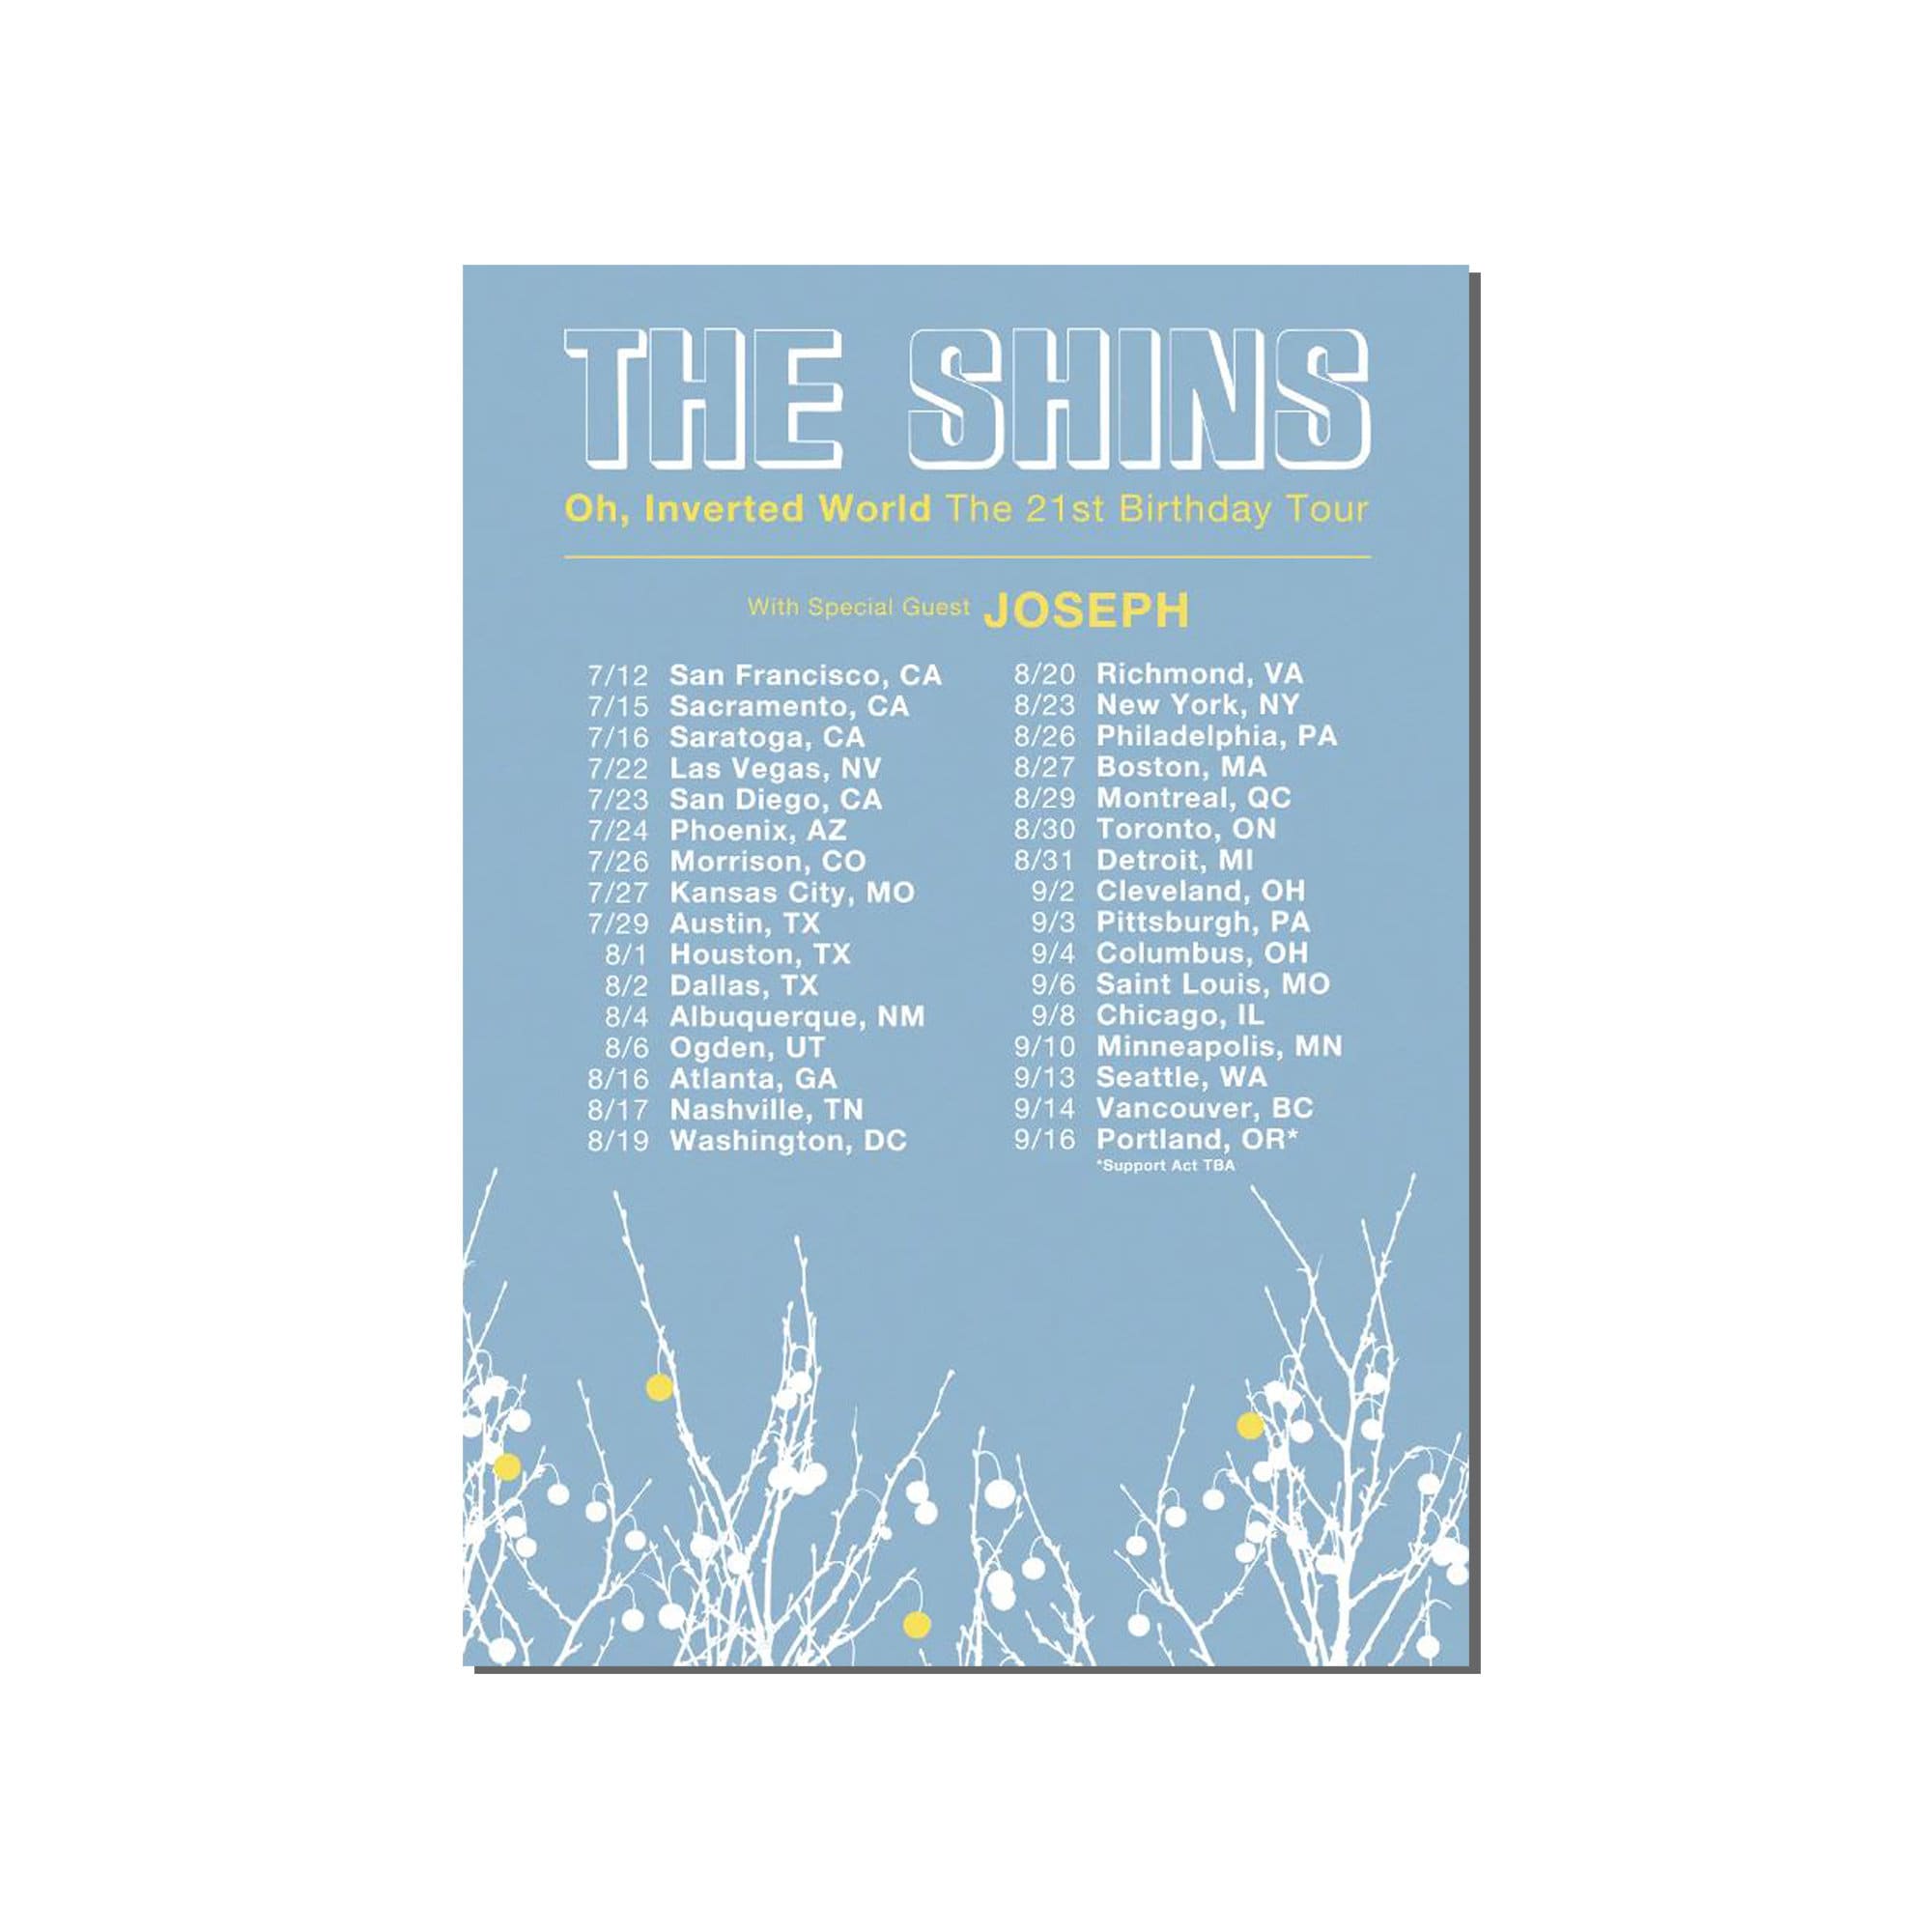 The Shins Oh Inverted World 21st Birthday Tour Poster Unframed,The Shins Tour 2022 Poster